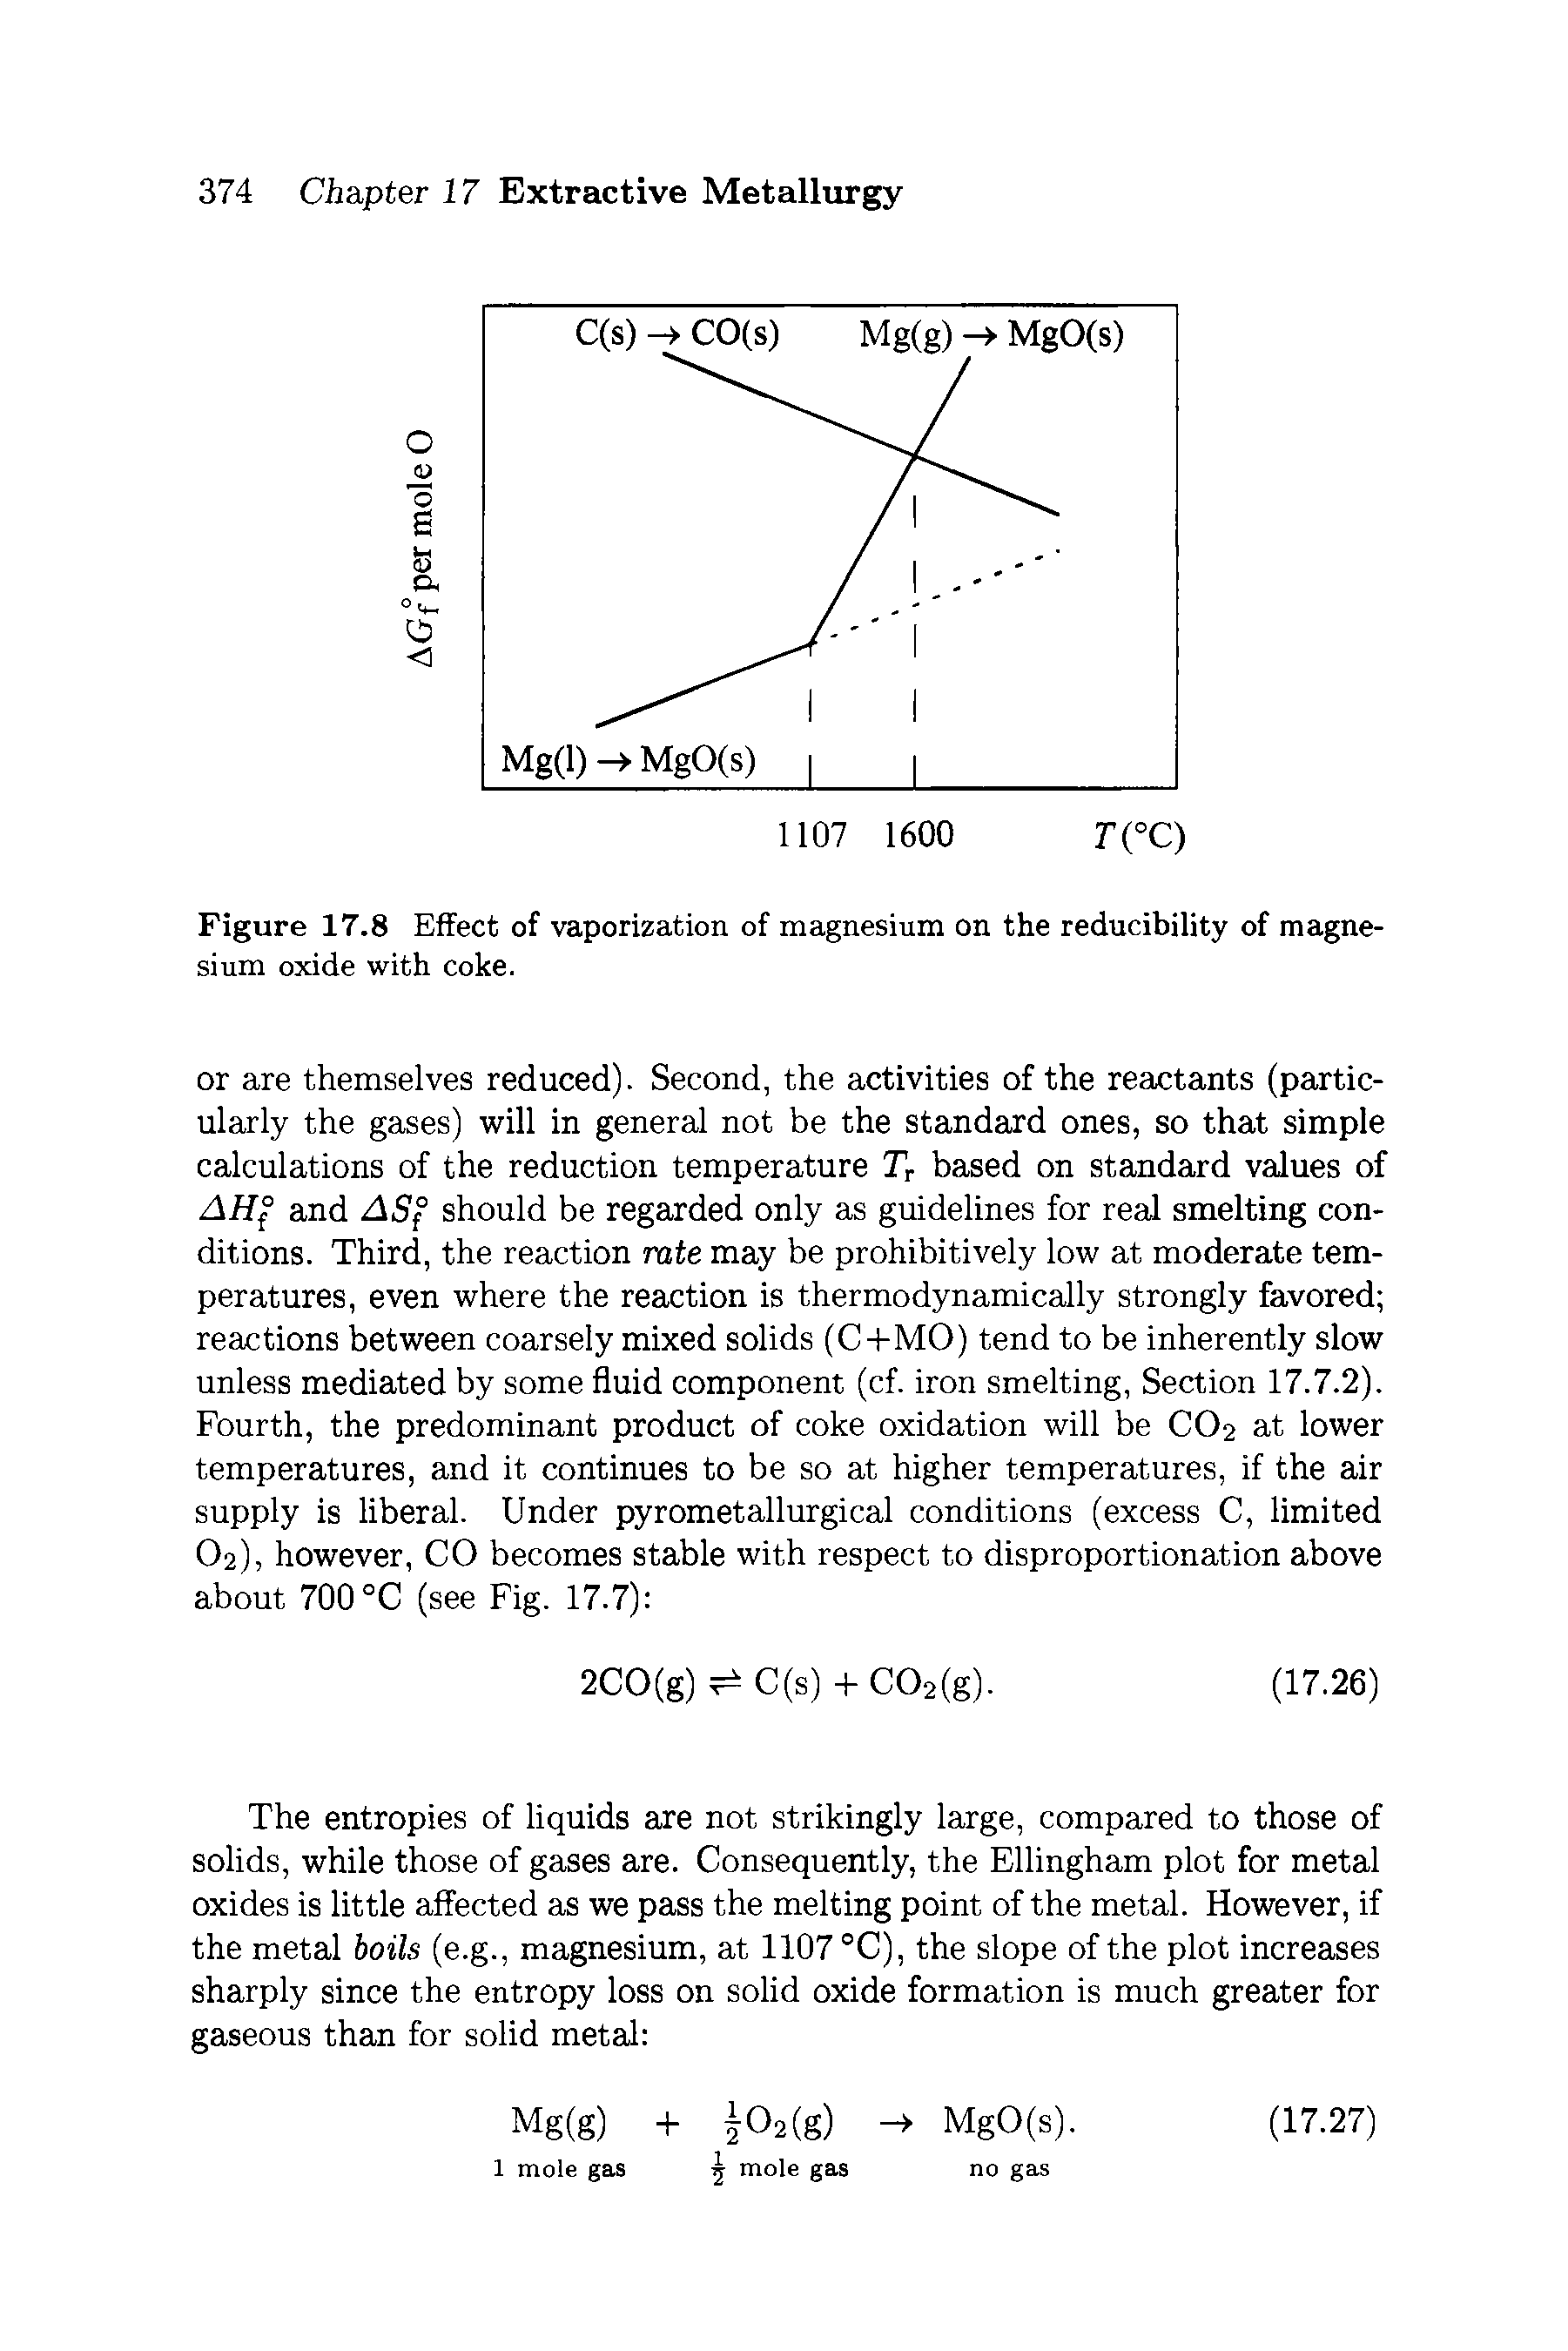 Figure 17.8 Effect of vaporization of magnesium on the reducibility of magnesium oxide with coke.